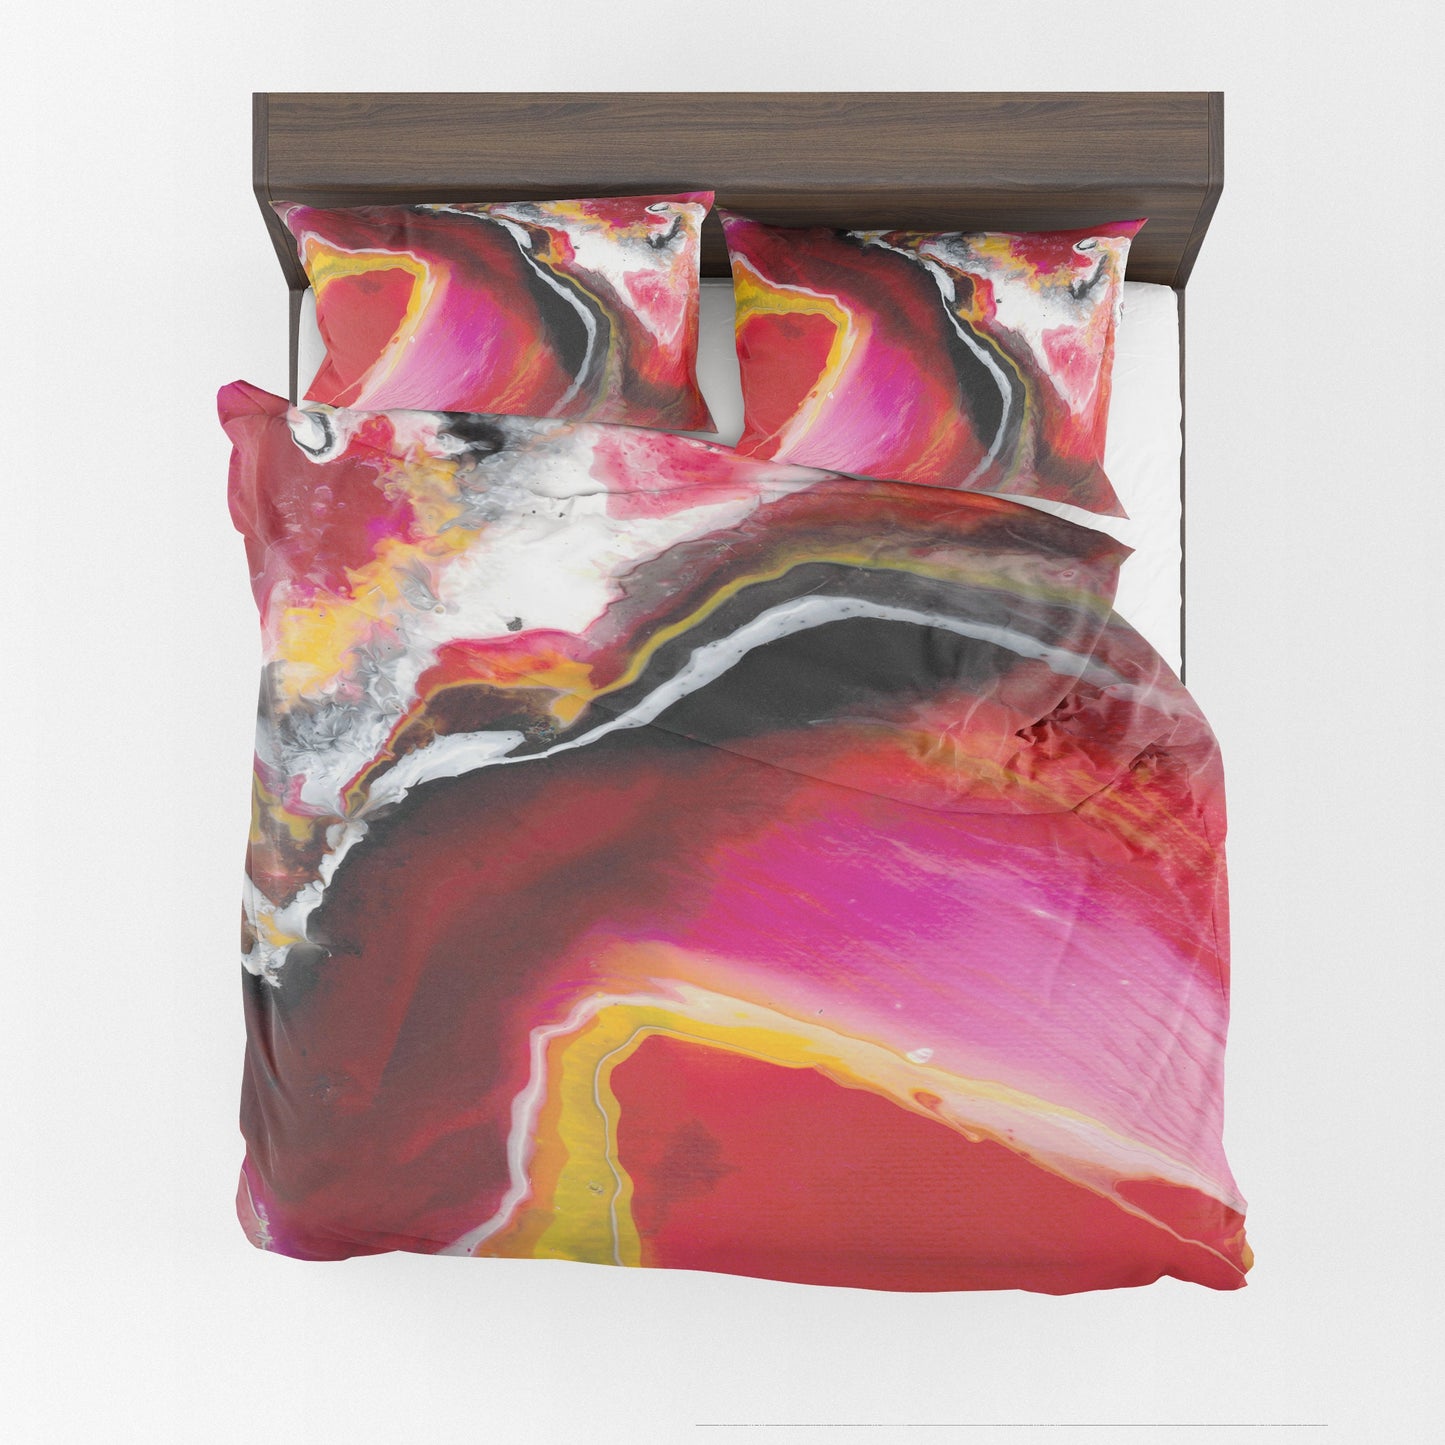 Red Abstract Duvet Cover or Comforter artsy bedding Twin Queen king red yellow black marble colorful duvet